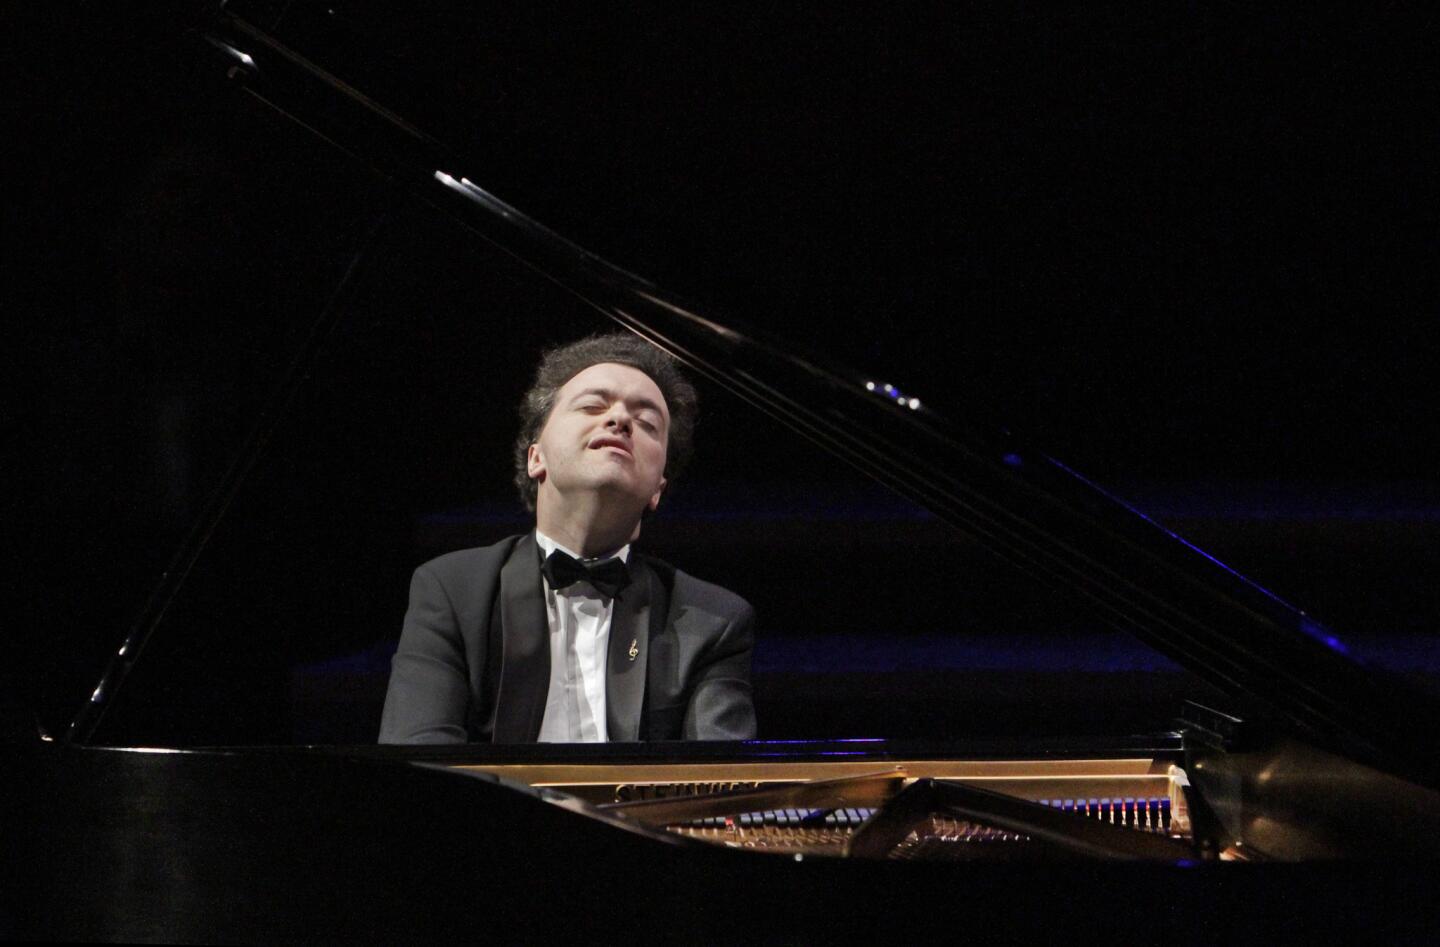 Evgeny Kissin, 42, played a program featuring Schubert and Scriabin at Walt Disney Concert Hall.